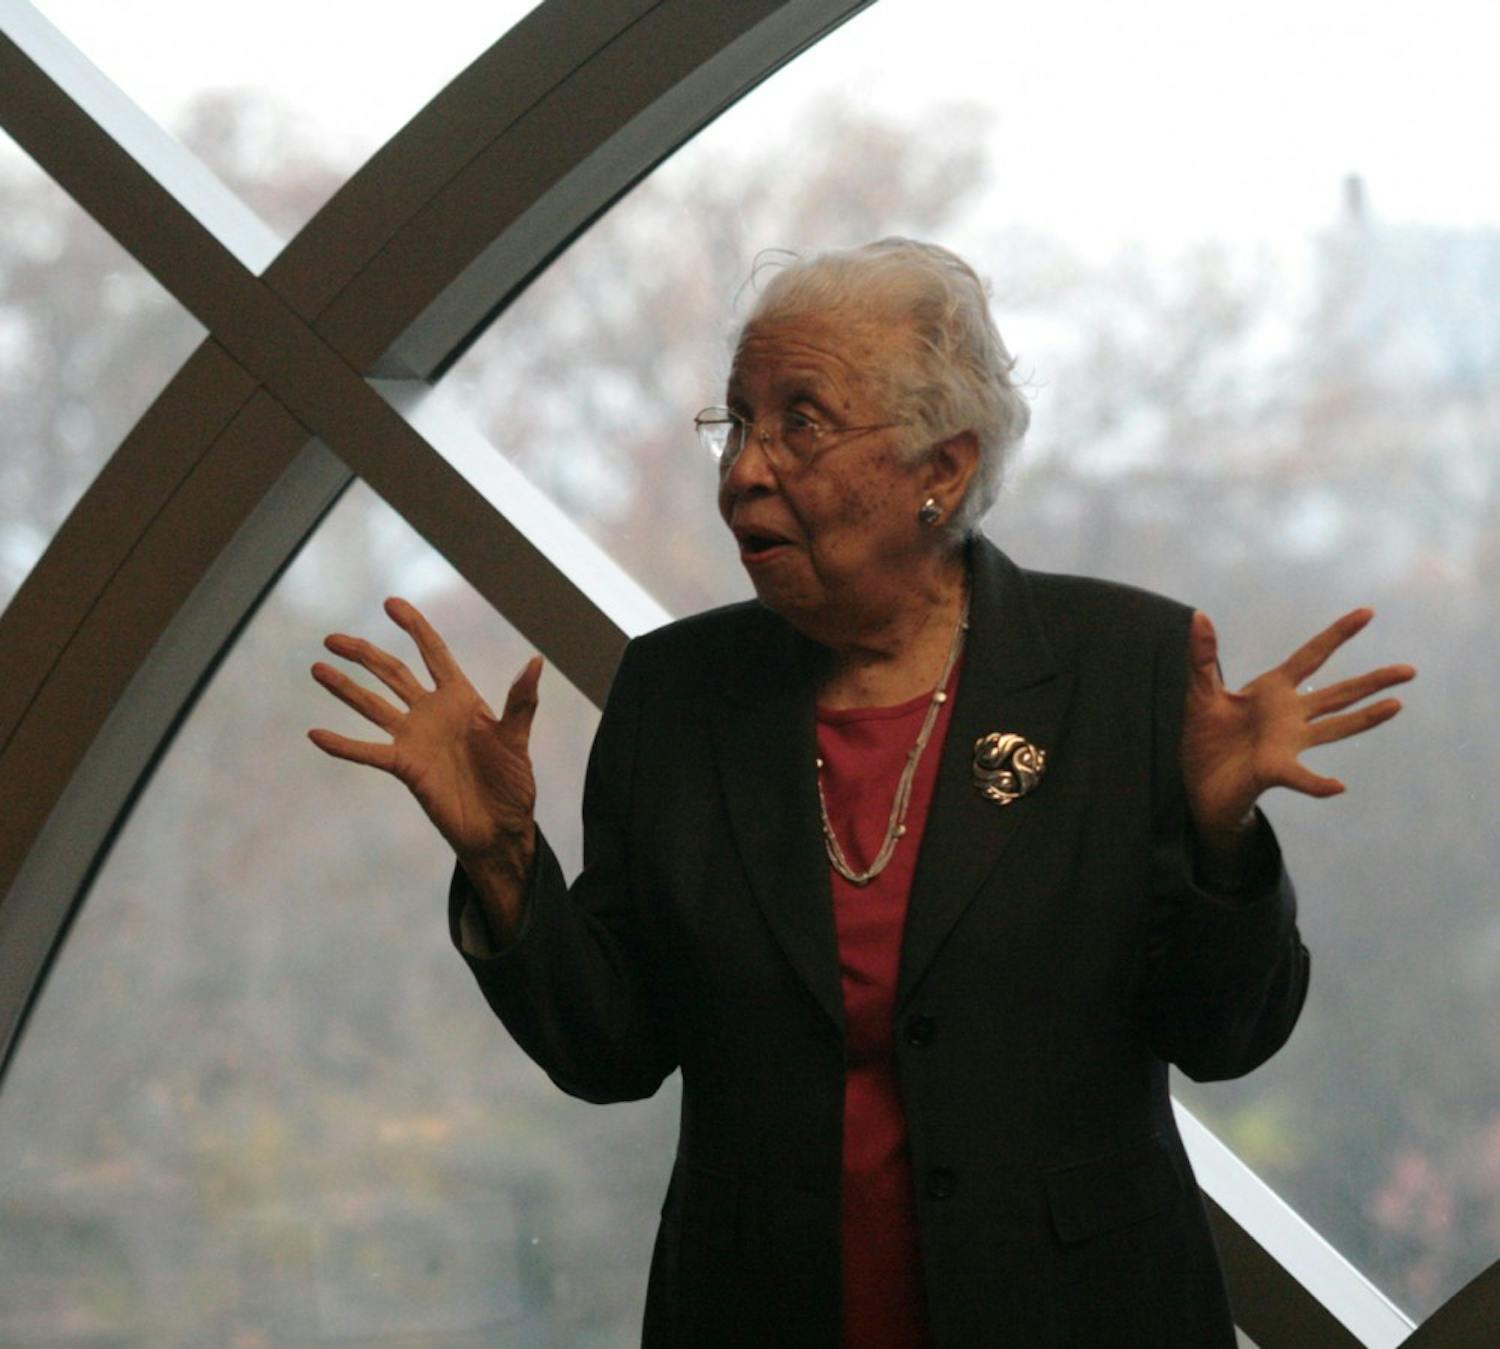 Hortense McClinton, the first black faculty member at the University,  spoke at the Parr Center for Ethics’ Lunch and Learn program in the Tate-Turner-Kuralt Building on Tuesday at noon. McClinton was hired in 1966 as a professor in the UNC School of Social Work.